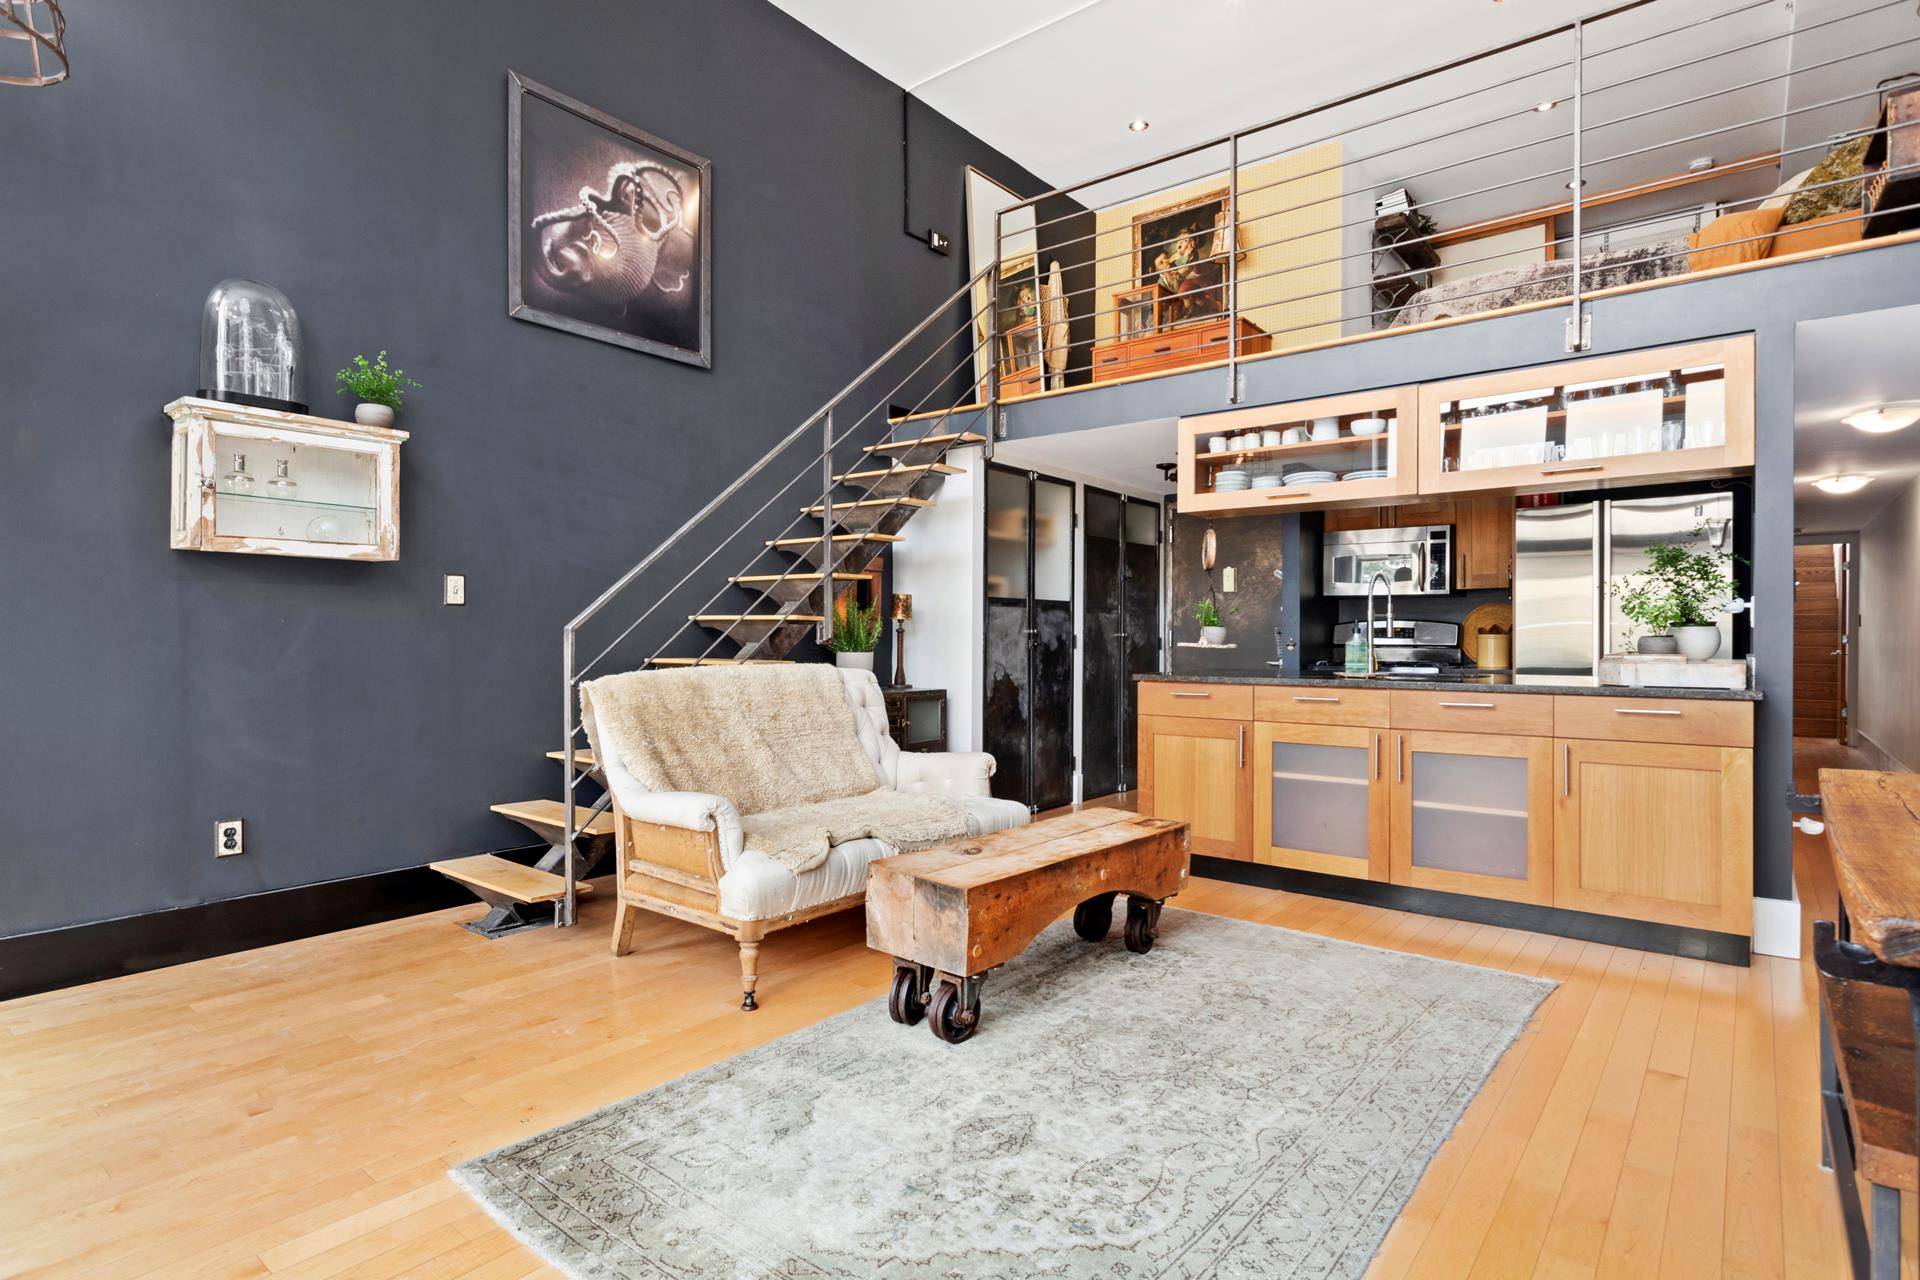 This is a mint condition triple exposure N S W loft style duplex with approximately 1, 250 square feet inside, three balconies and an additional 250 SQFT private roof deck ...